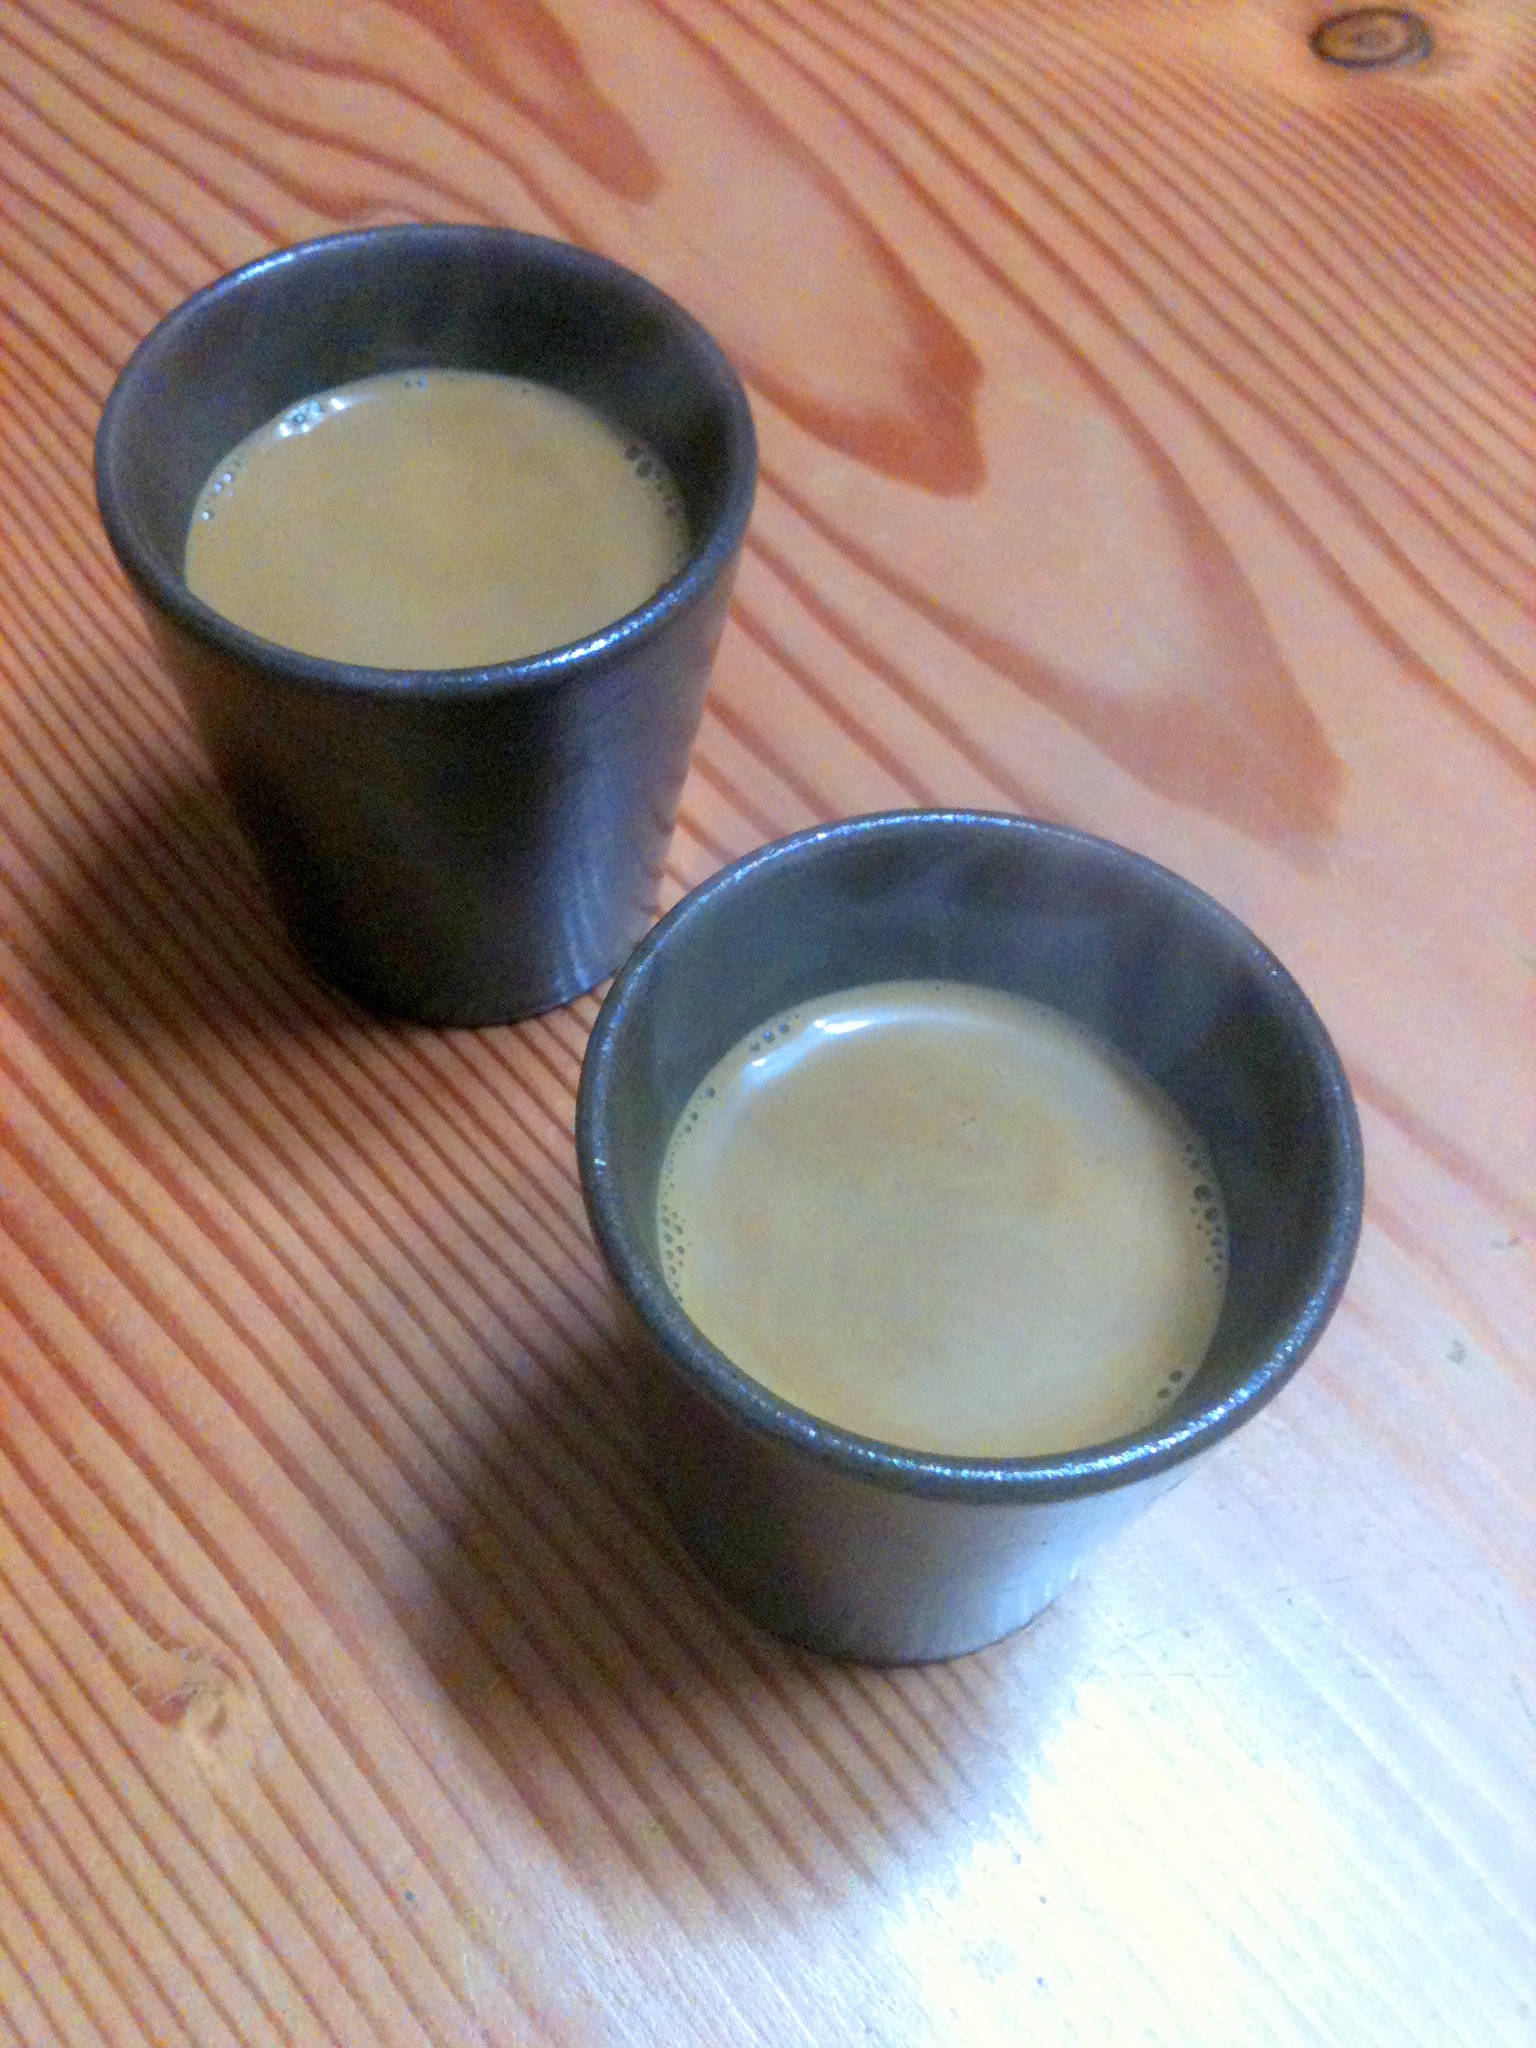 two cups sit on a table, one has a drink in it